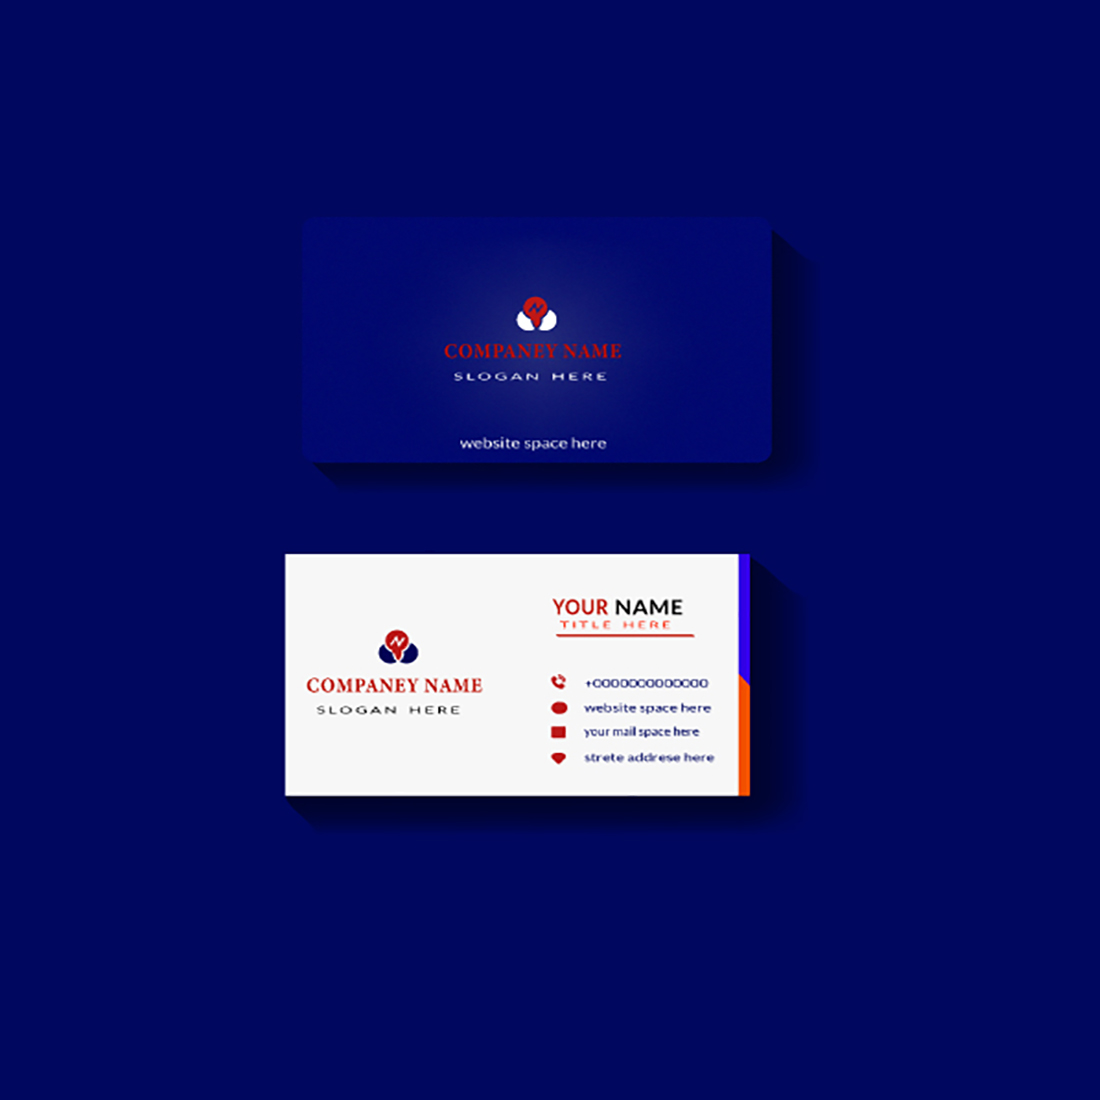 Business card on a blue background.